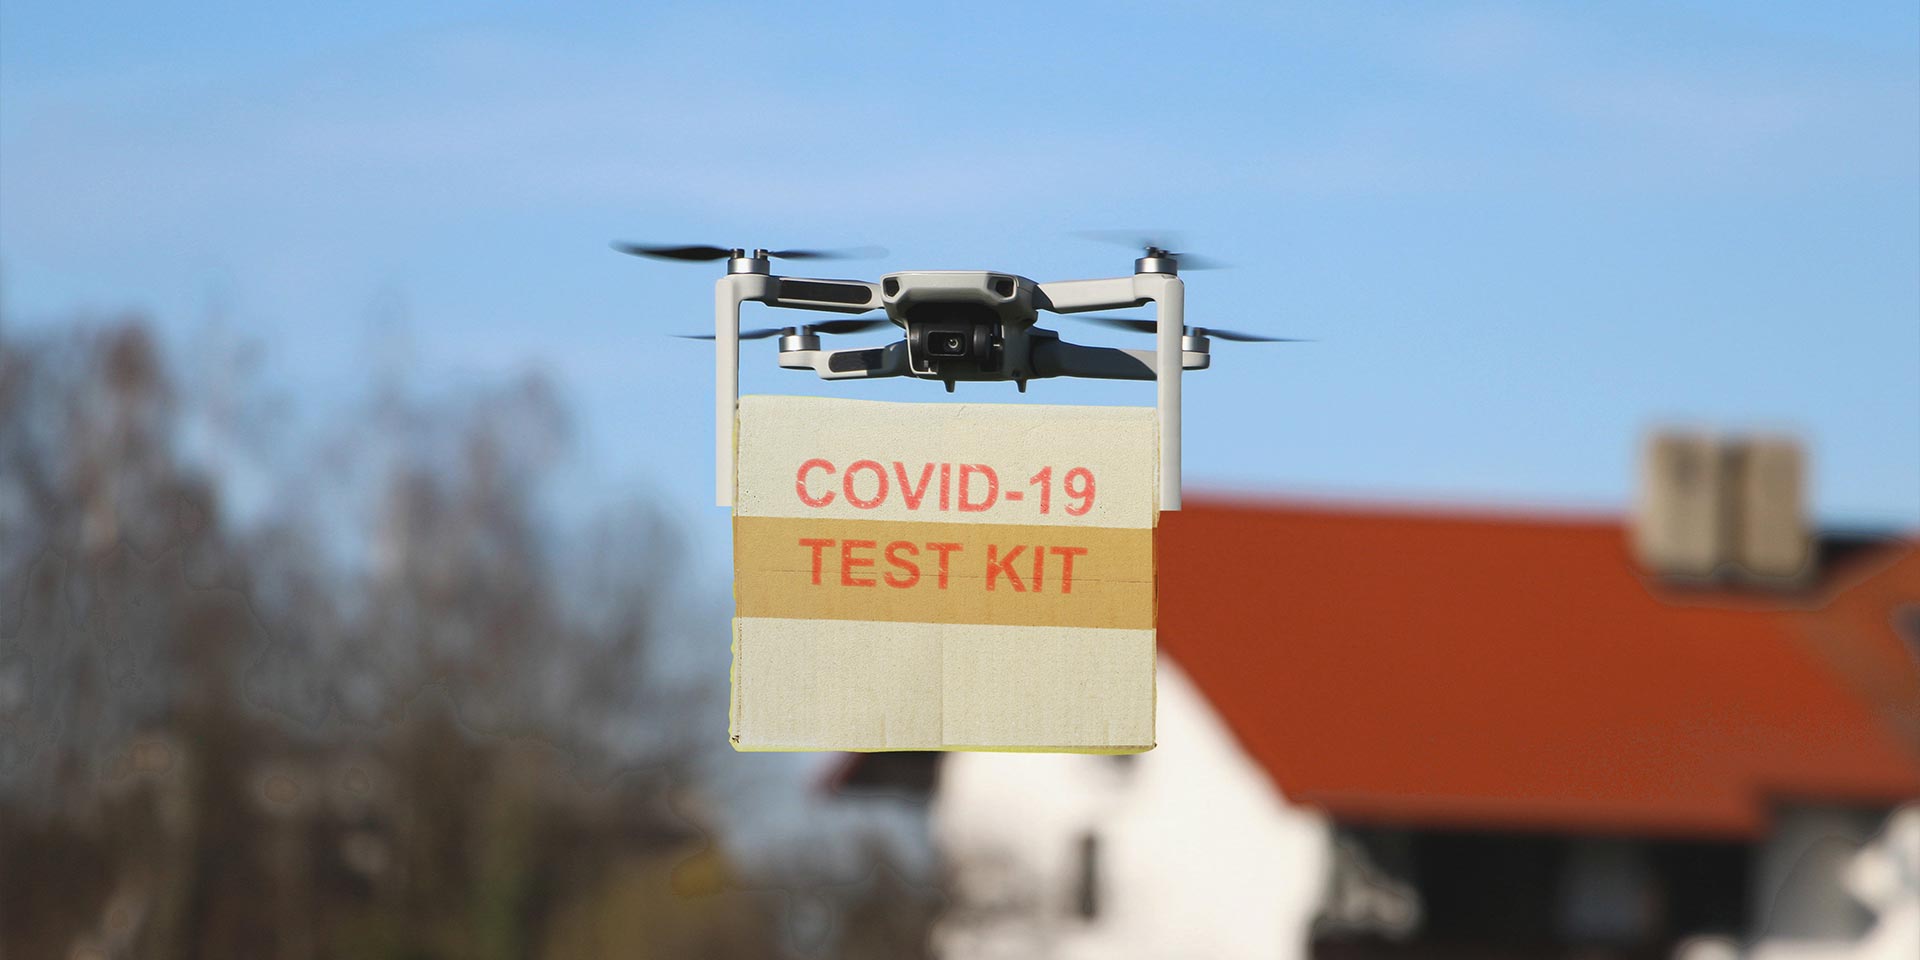 Drones are Enabling Authorities to Implement an Effective COVID-19 Lockdown